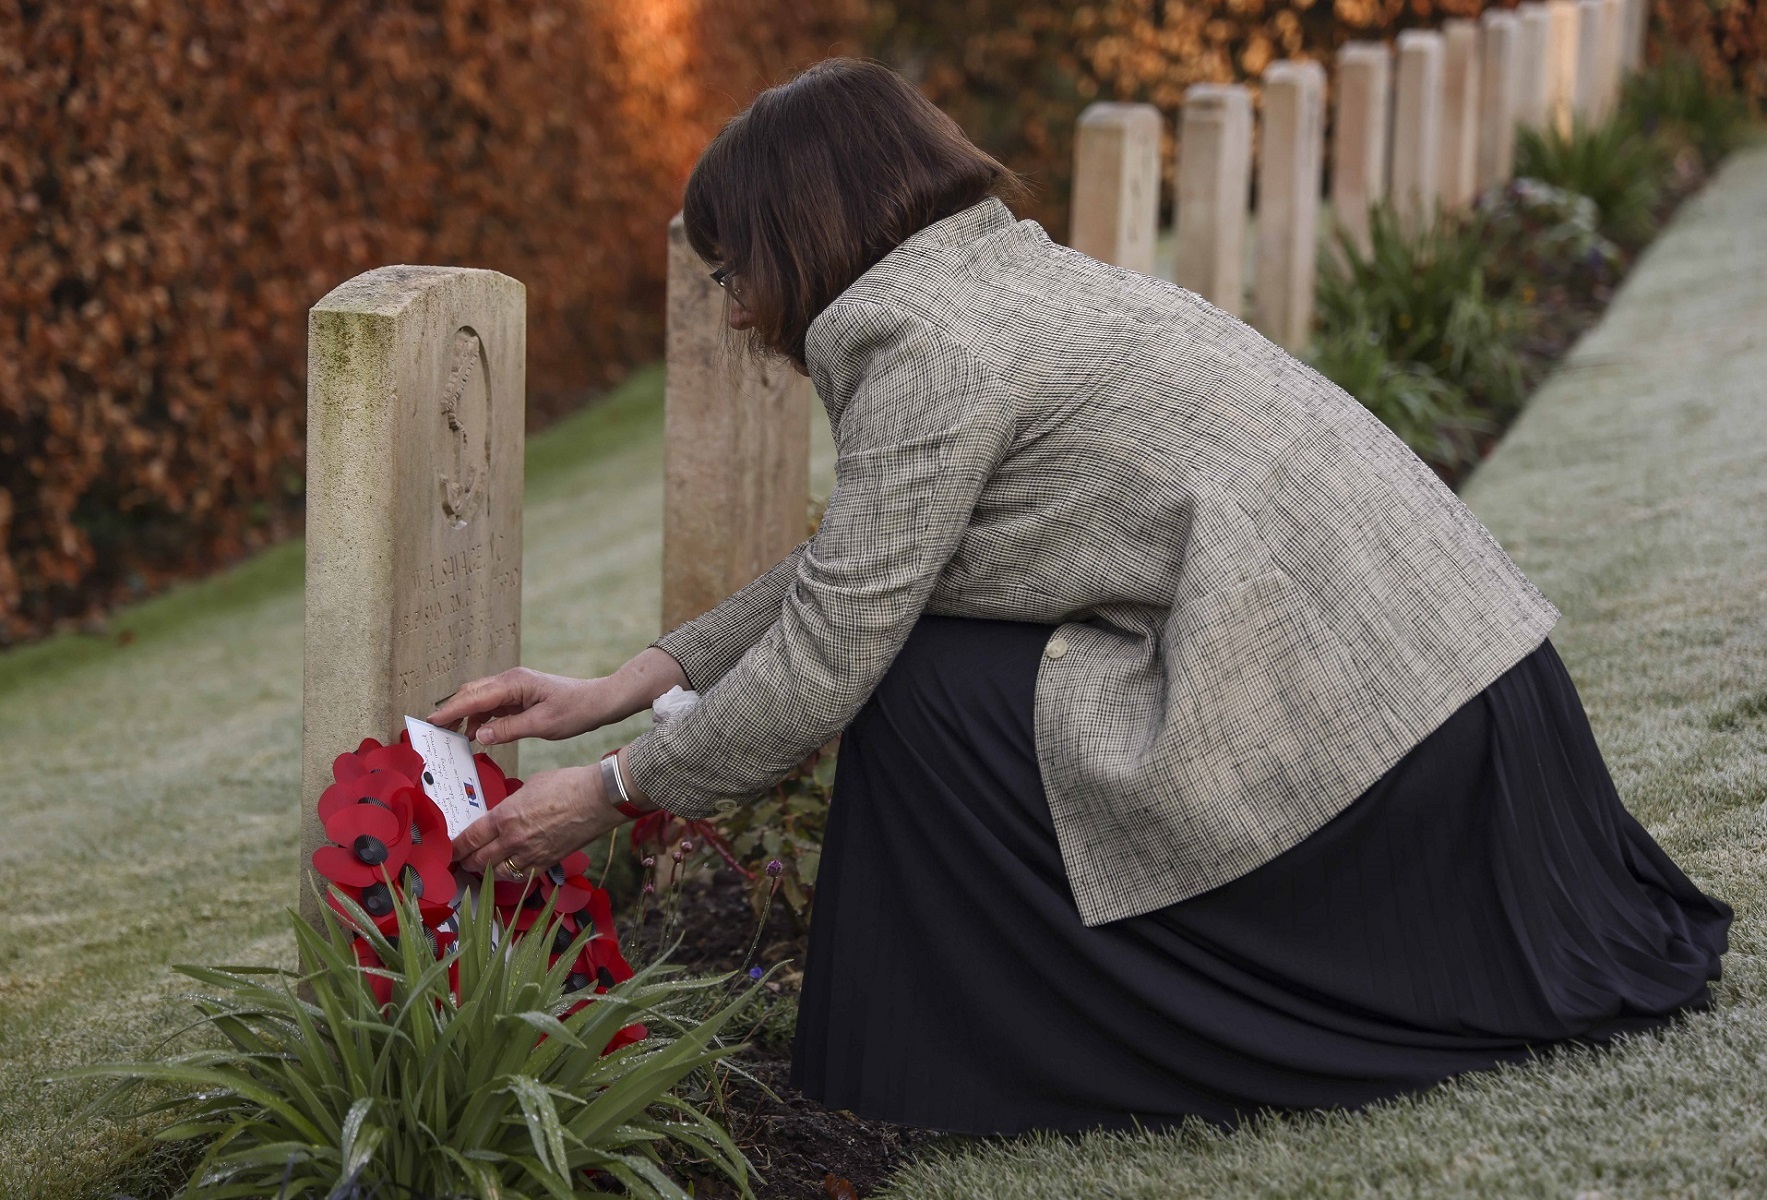 Caroline Carr (great niece) places a wreath at the headstone of Able Seaman Bill Savage VC during a small memorial service held at Falmouth Cemetery. Credit: LPhot Dan Rosenbaum, RNAS Yeovilton